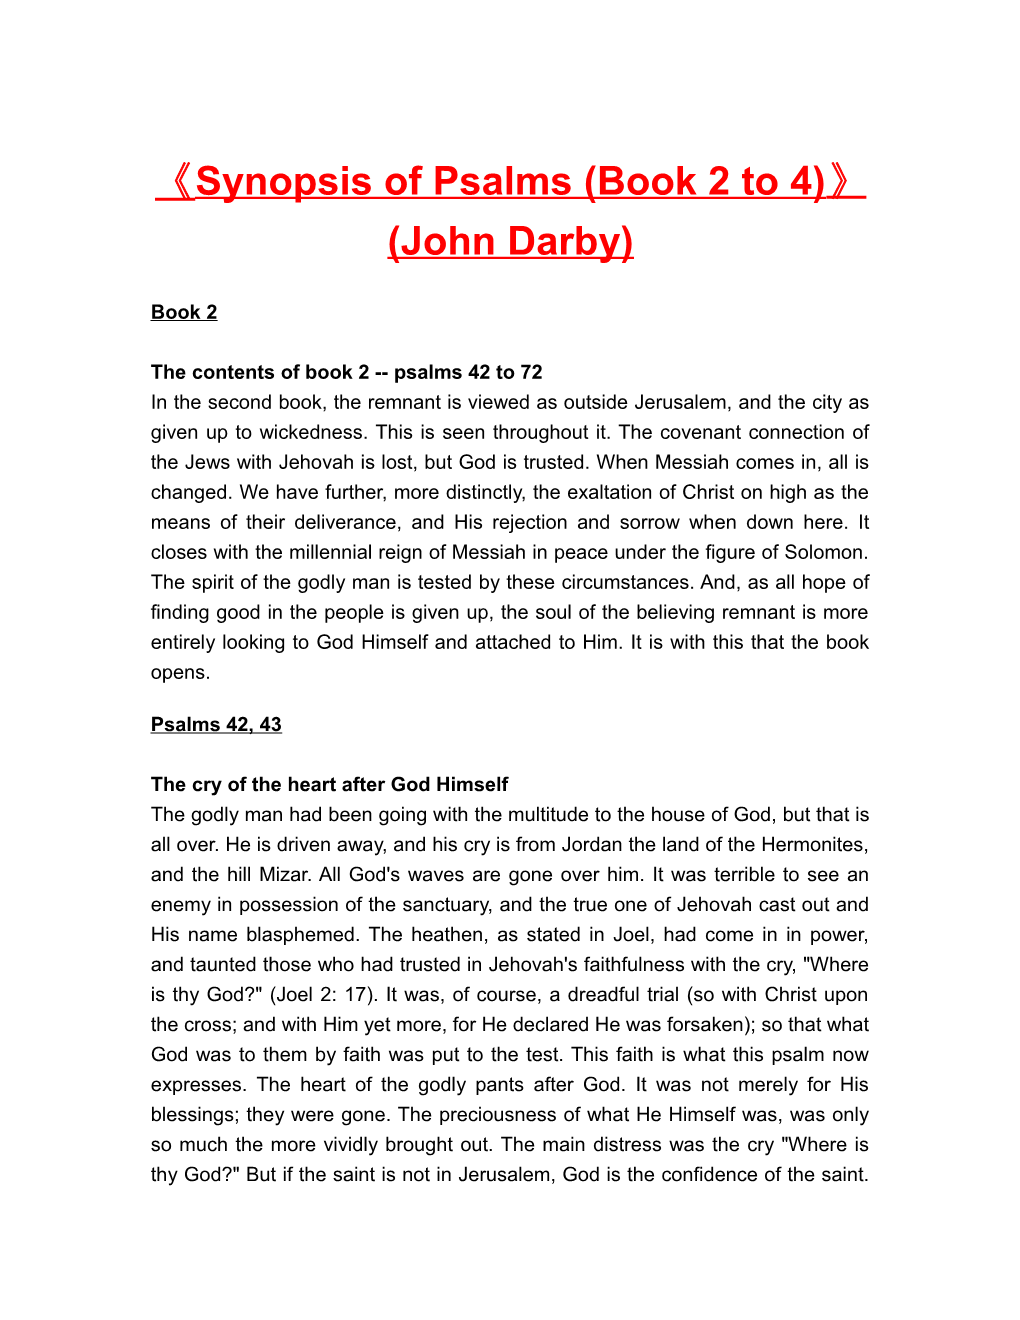 Synopsis of Psalms (Book 2 to 4) (John Darby)